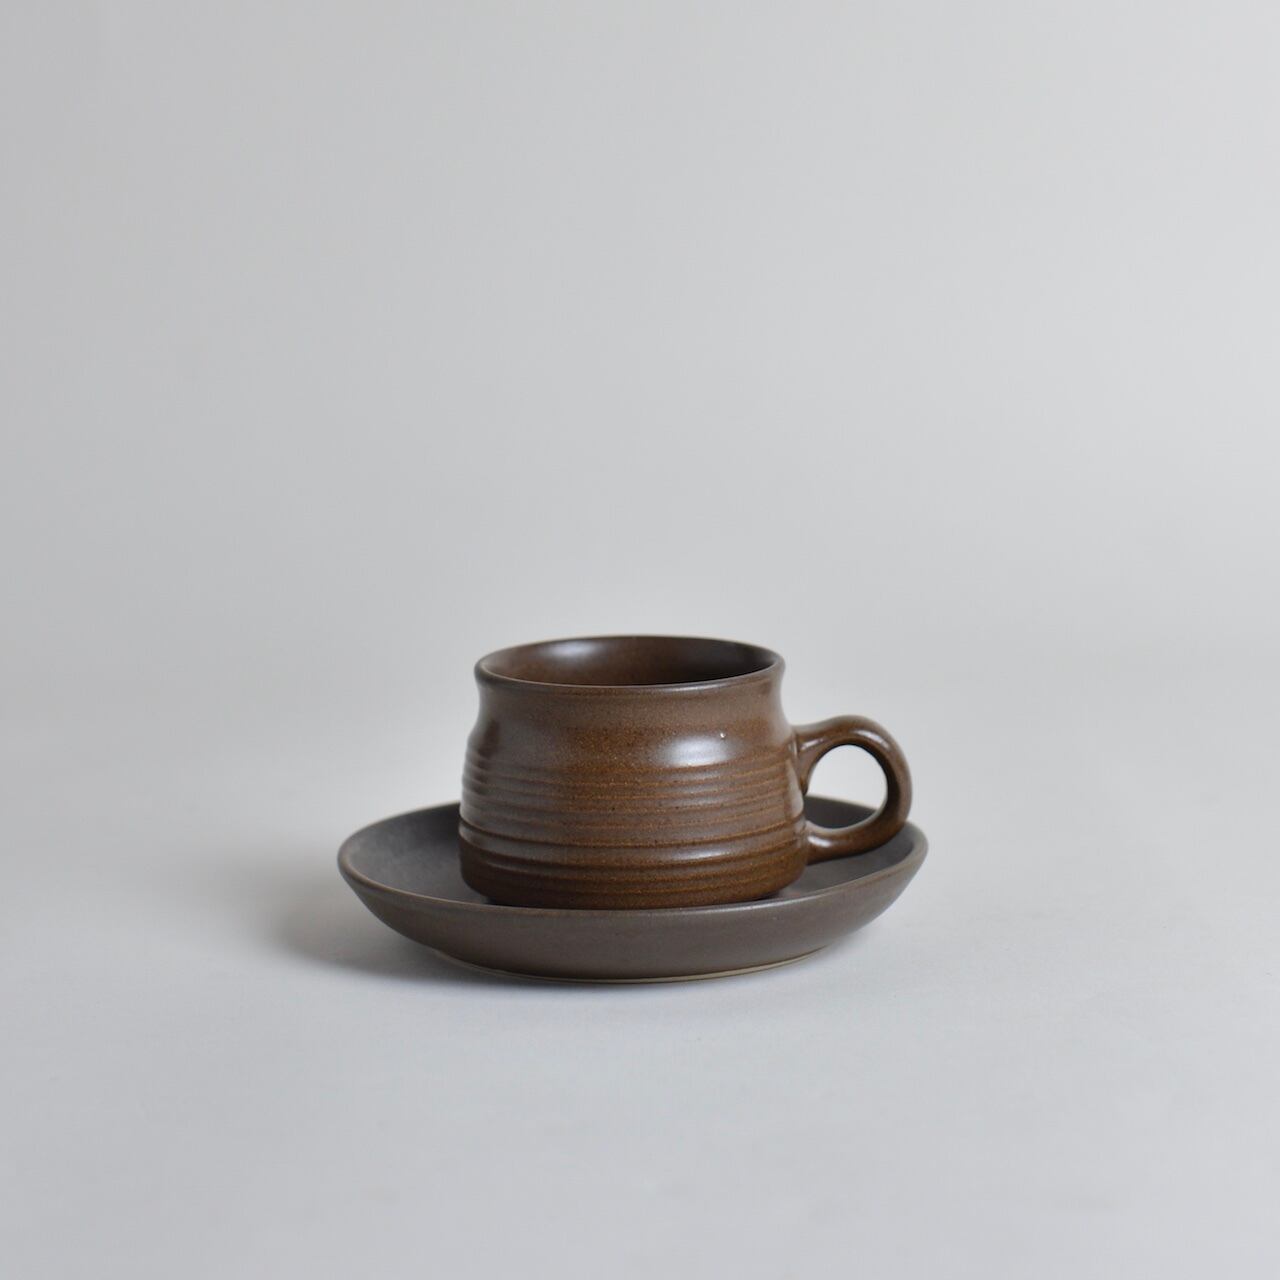 DENBY Cap&saucer / デンビー カップ&ソーサー〈食器 / コーヒーカップ 〉2904-0089-02 A |  「TRILL」アンティーク家具と雑貨SHABBY'S MARKETPLACE の姉妹店 powered by BASE